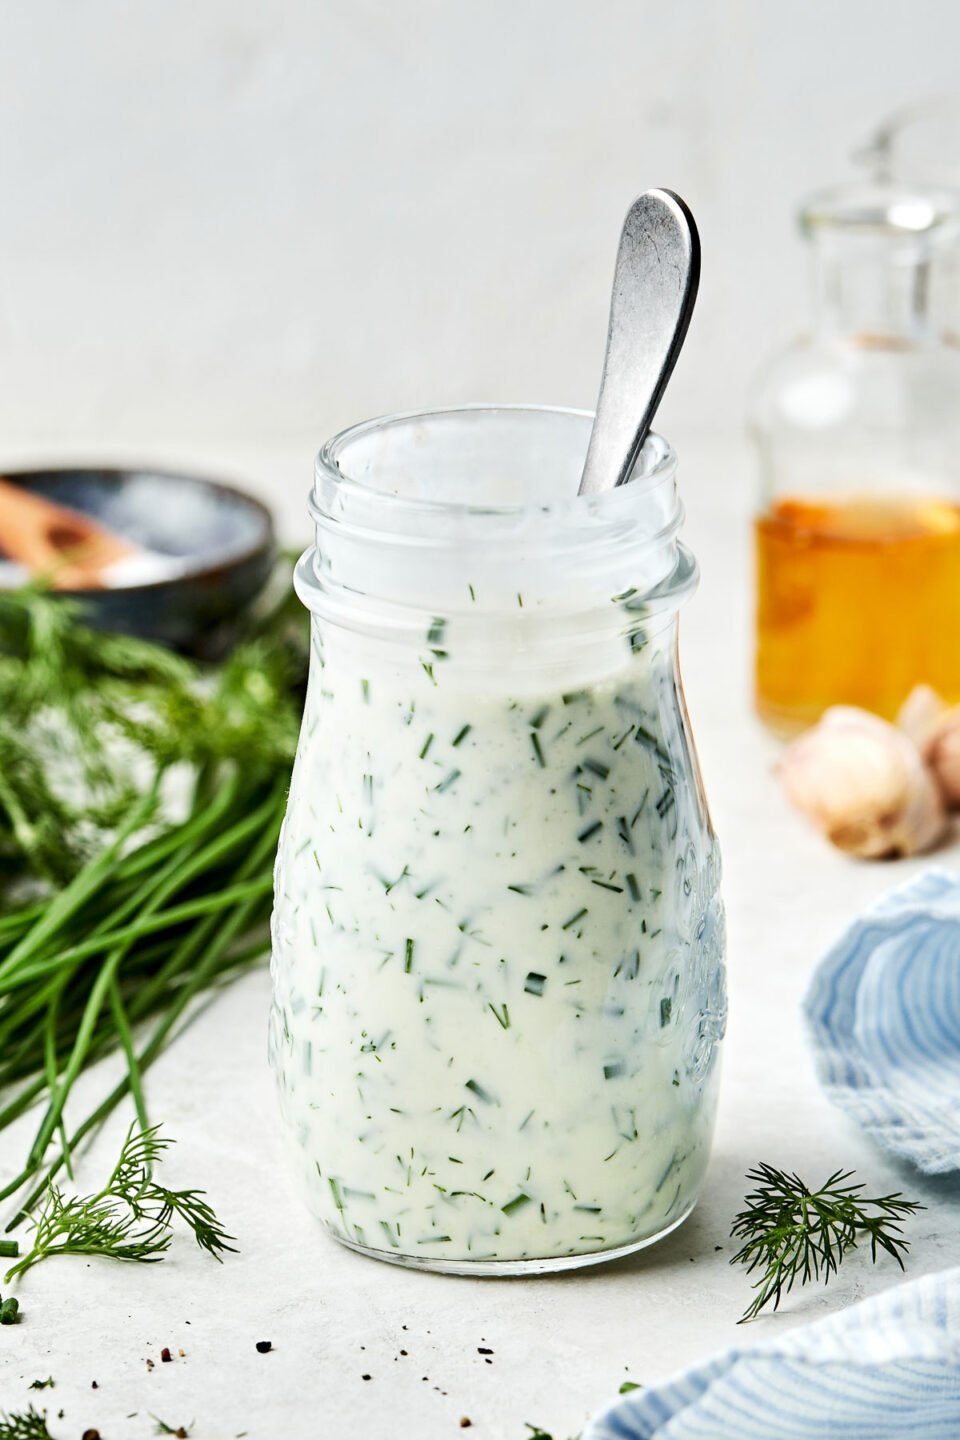 A side shot of ranch dressing in a glass jar. The jar sits on a white surface alongside a blue and white striped cloth, a container of vinegar, garlic, dill, chives, and a bowl of salt.